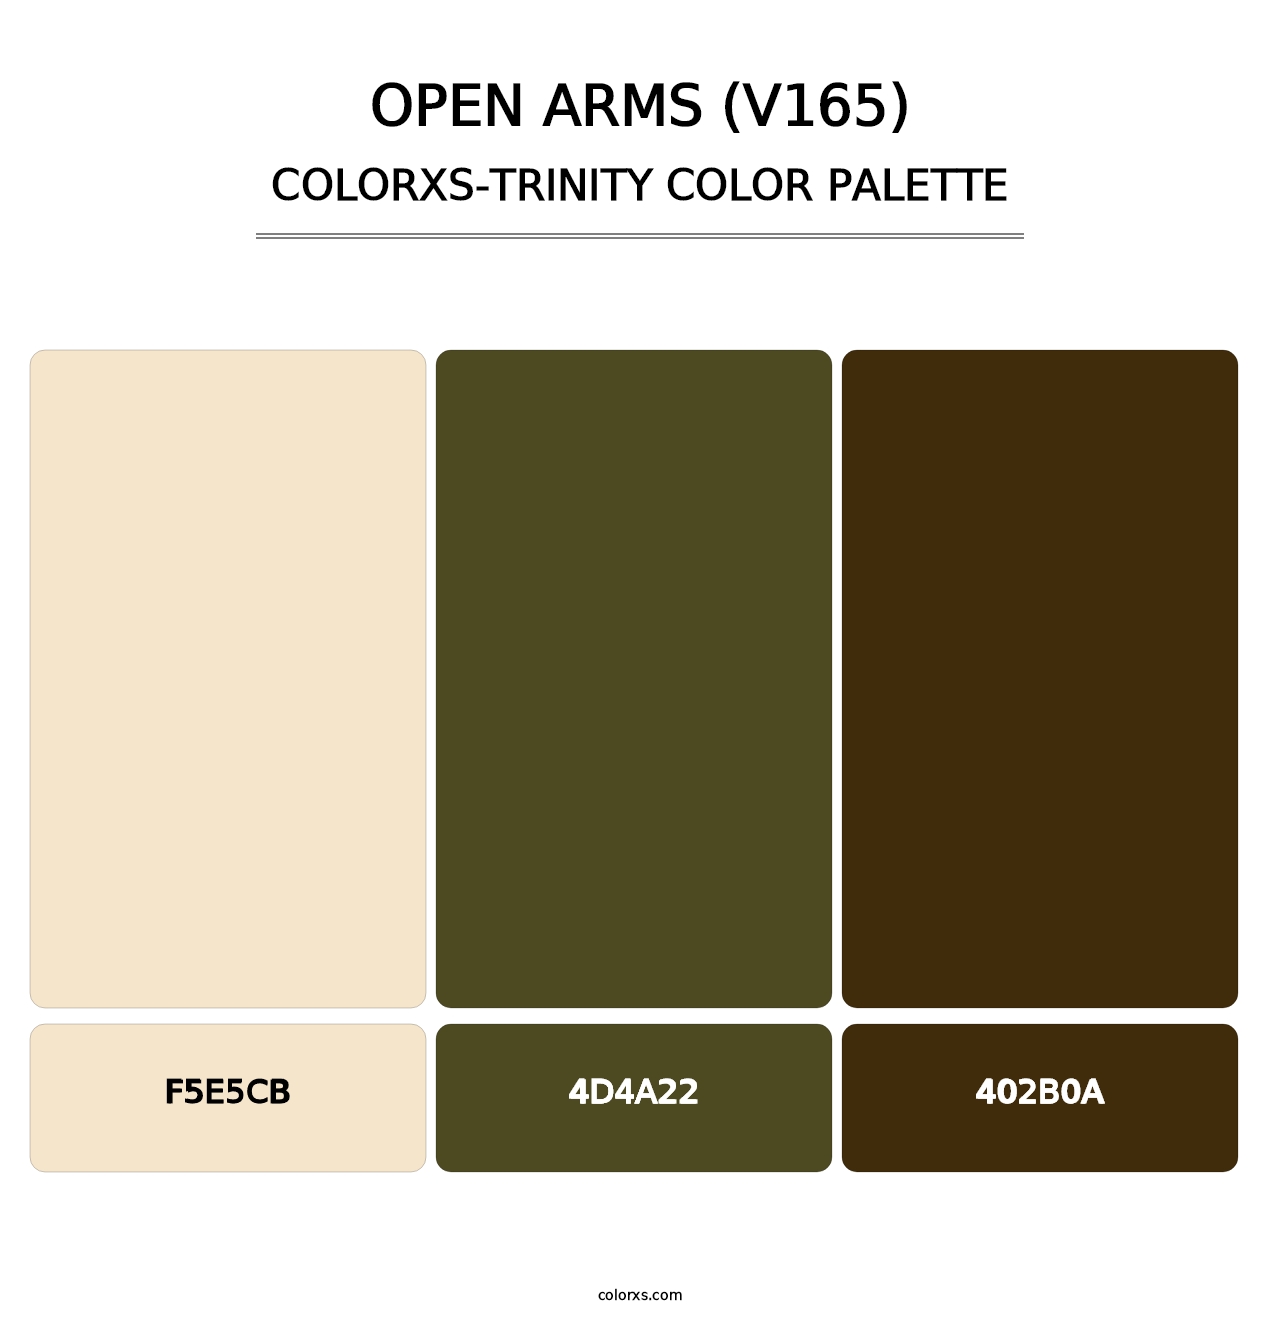 Open Arms (V165) - Colorxs Trinity Palette